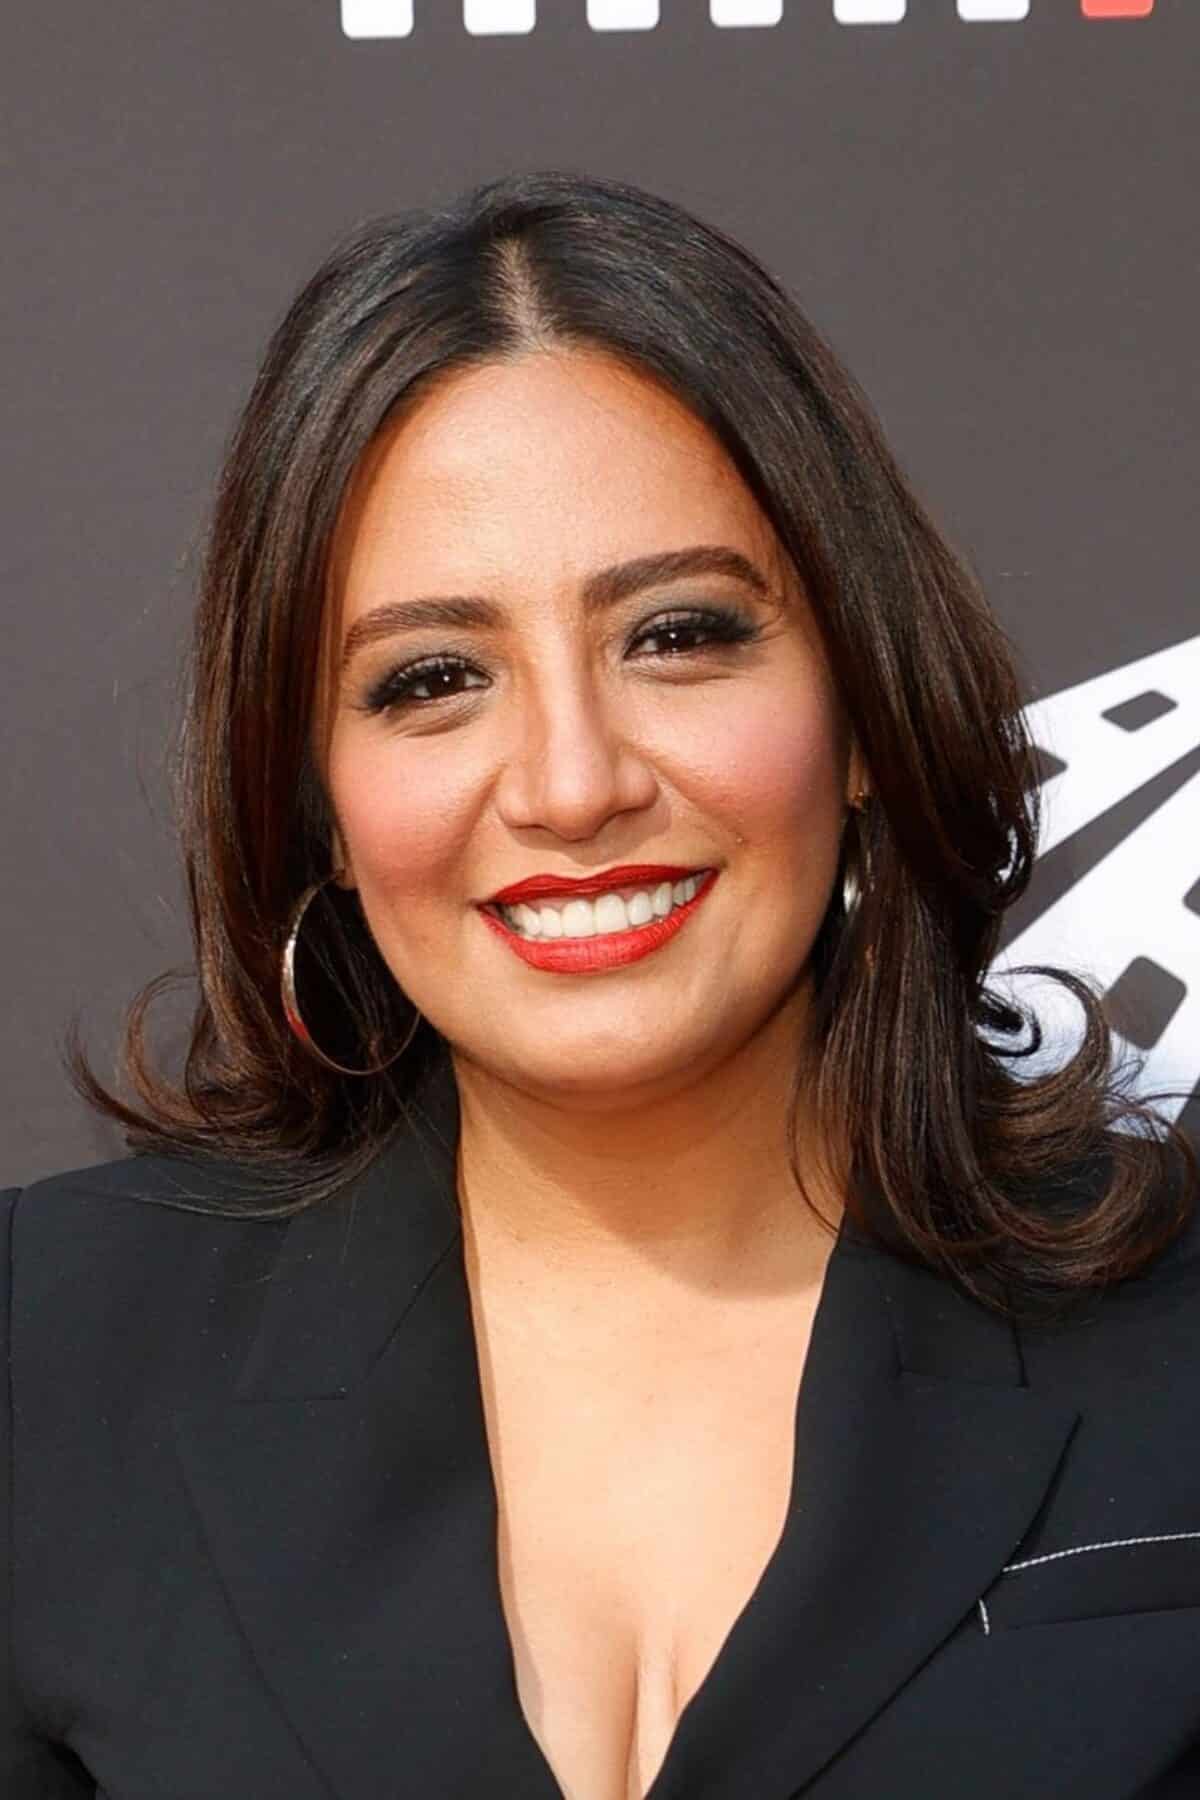 HOLLYWOOD, CALIFORNIA - JUNE 04: Cristela Alonzo attends the special preview screening of 